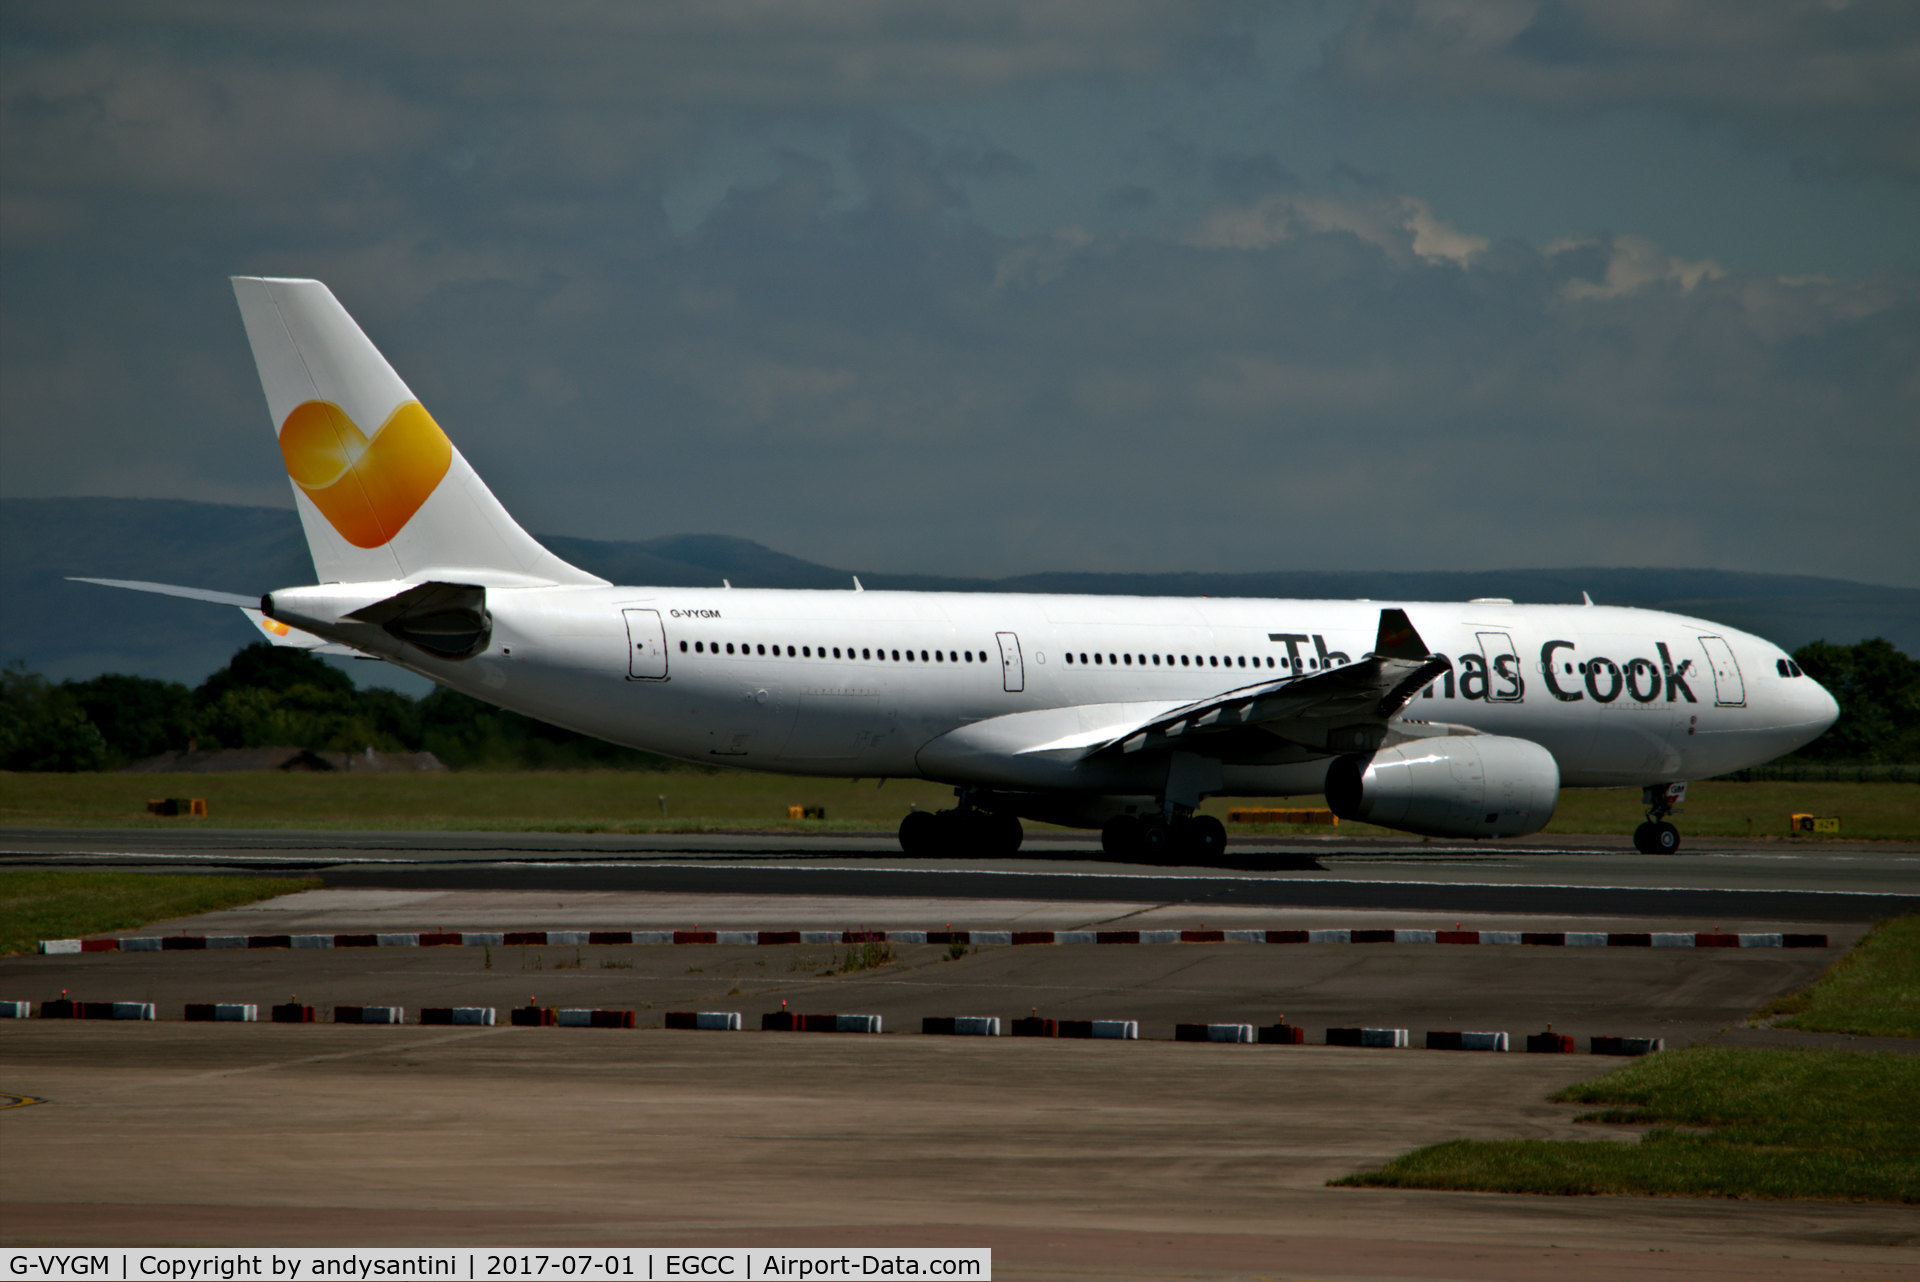 G-VYGM, 2015 Airbus A330-243 C/N 1601, crossing 23R for 23L [take off runway]